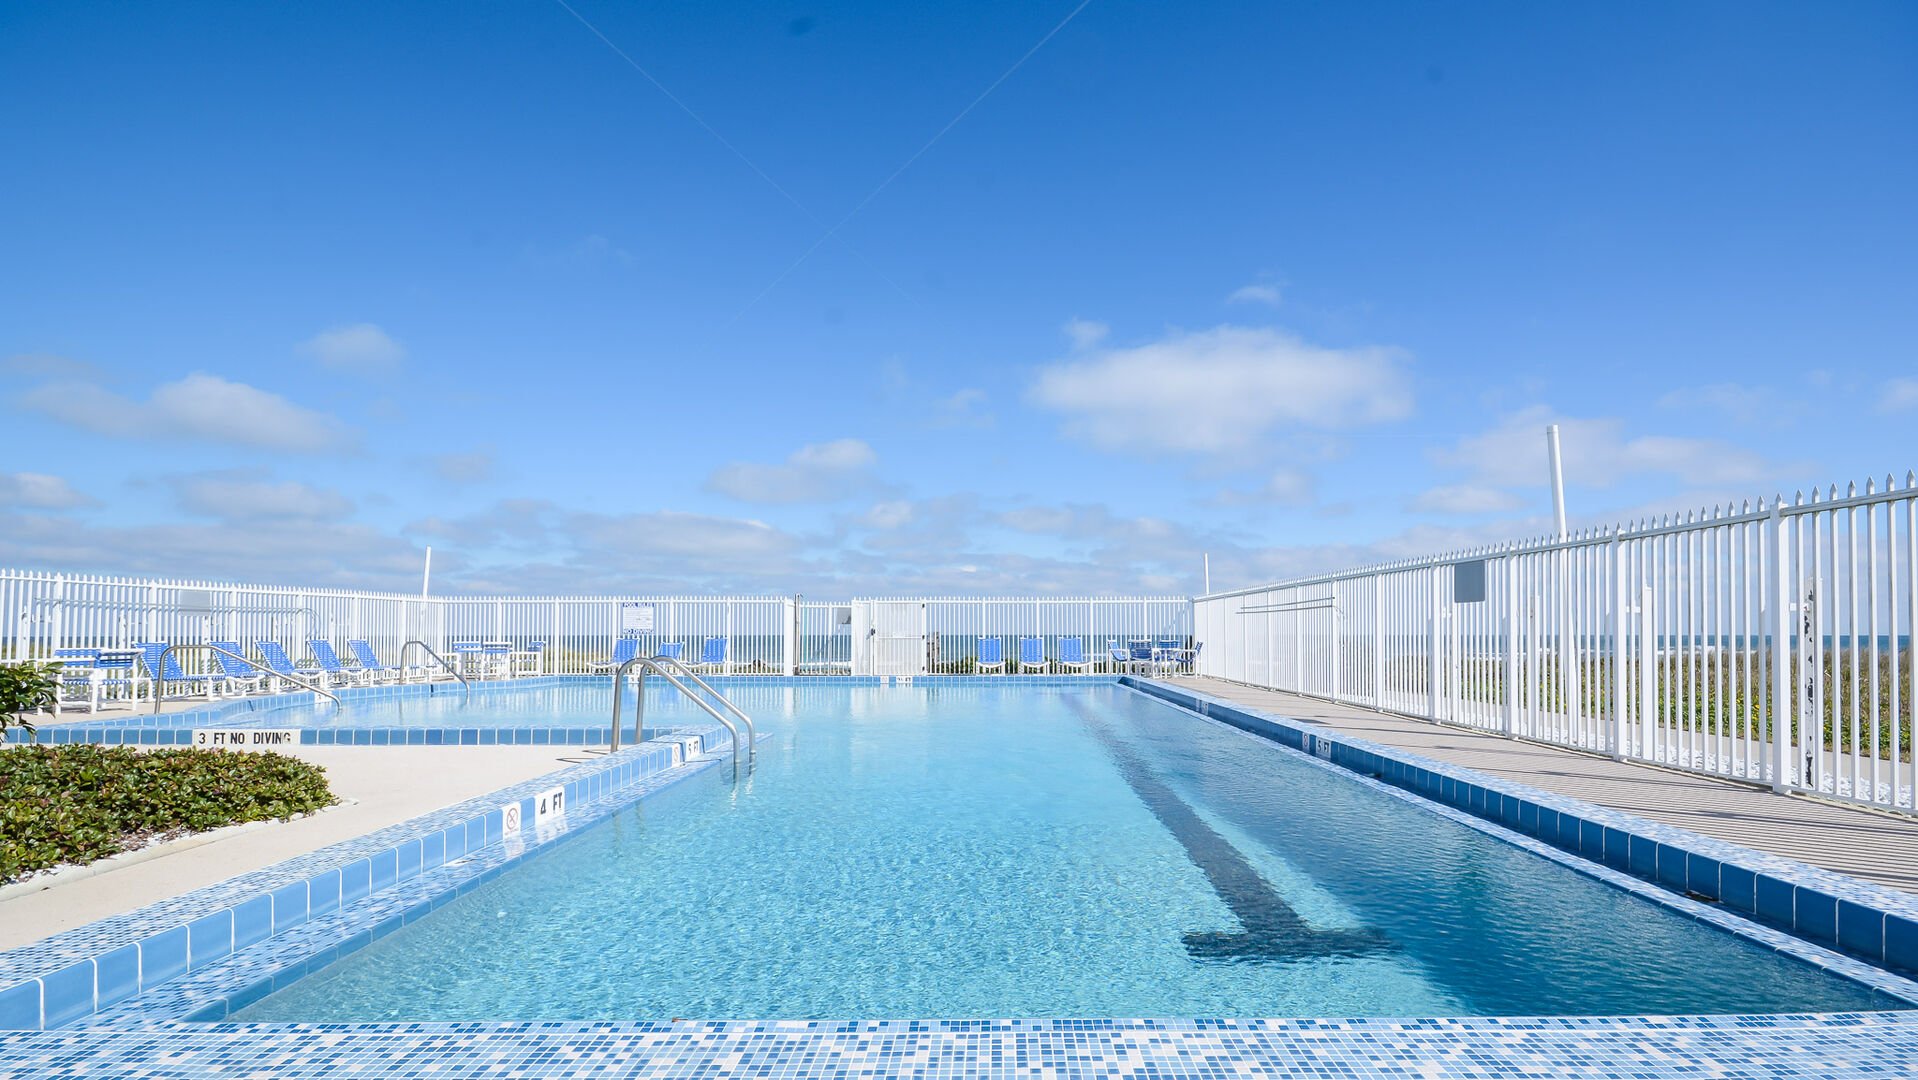 Oceanfront pool. The best of both worlds.